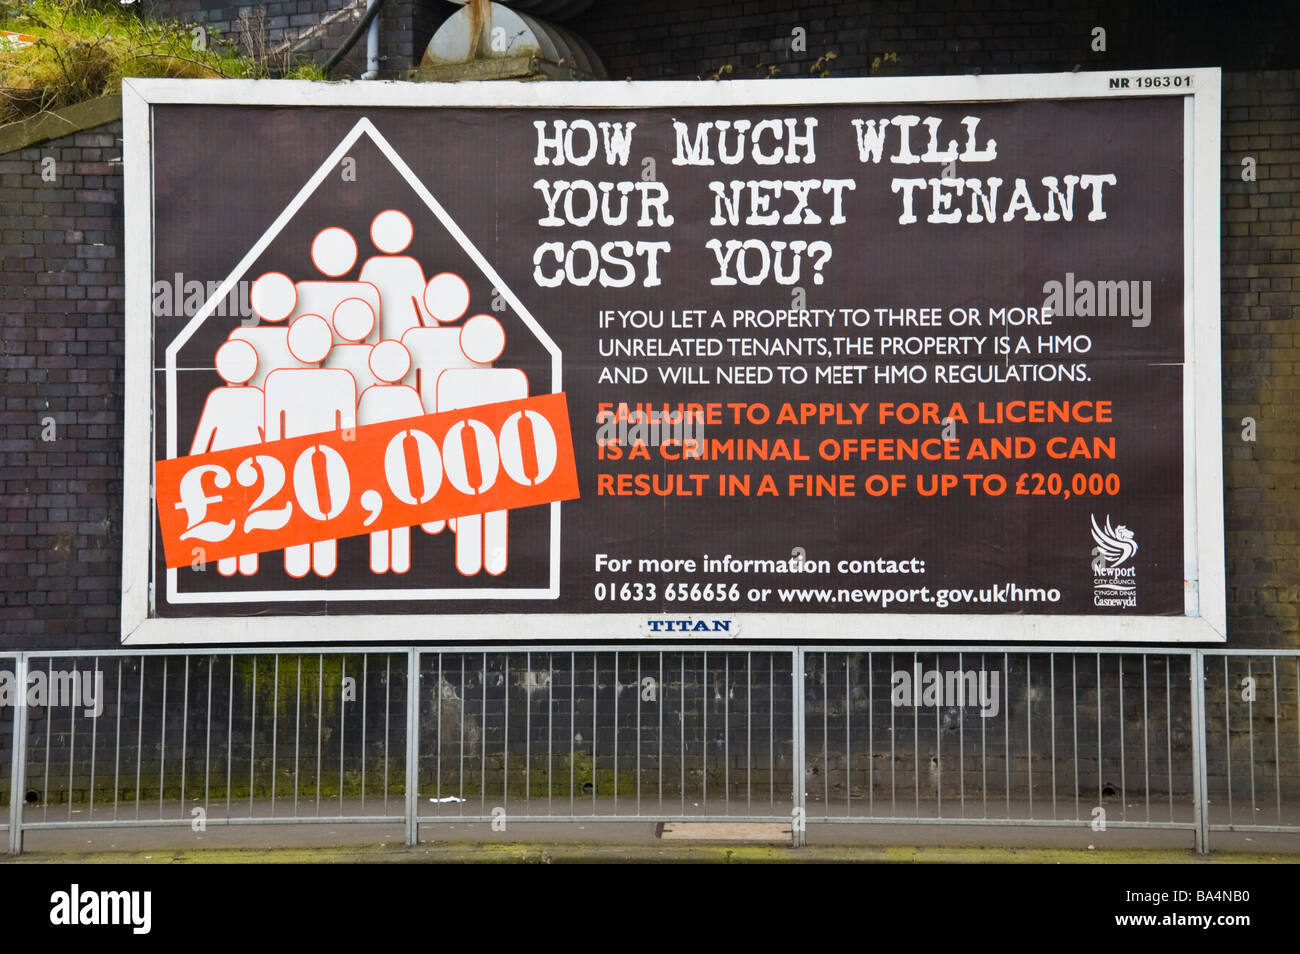 Titan advertising billboard for landlords with houses of multiple occupation on hoarding in Newport South Wales UK Stock Photo